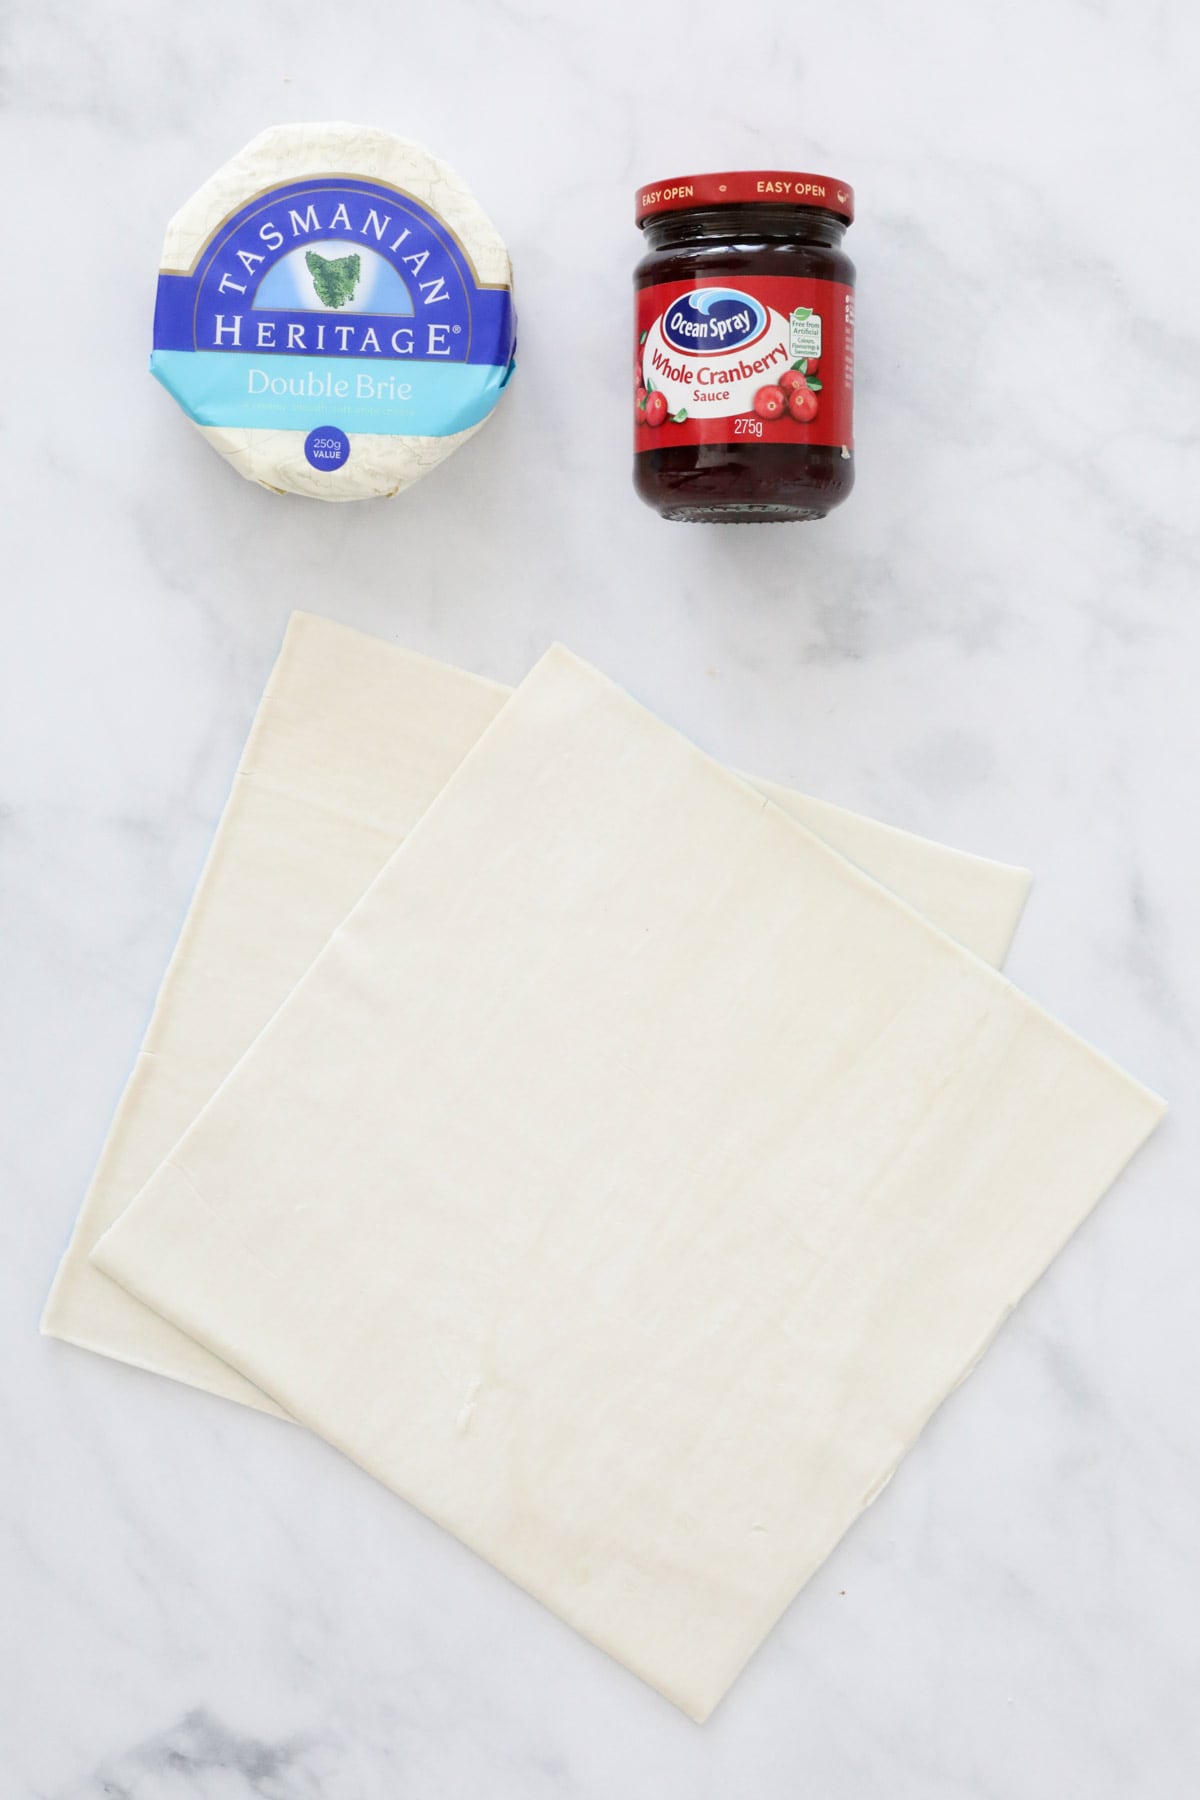 3 ingredients set out on a bench top.